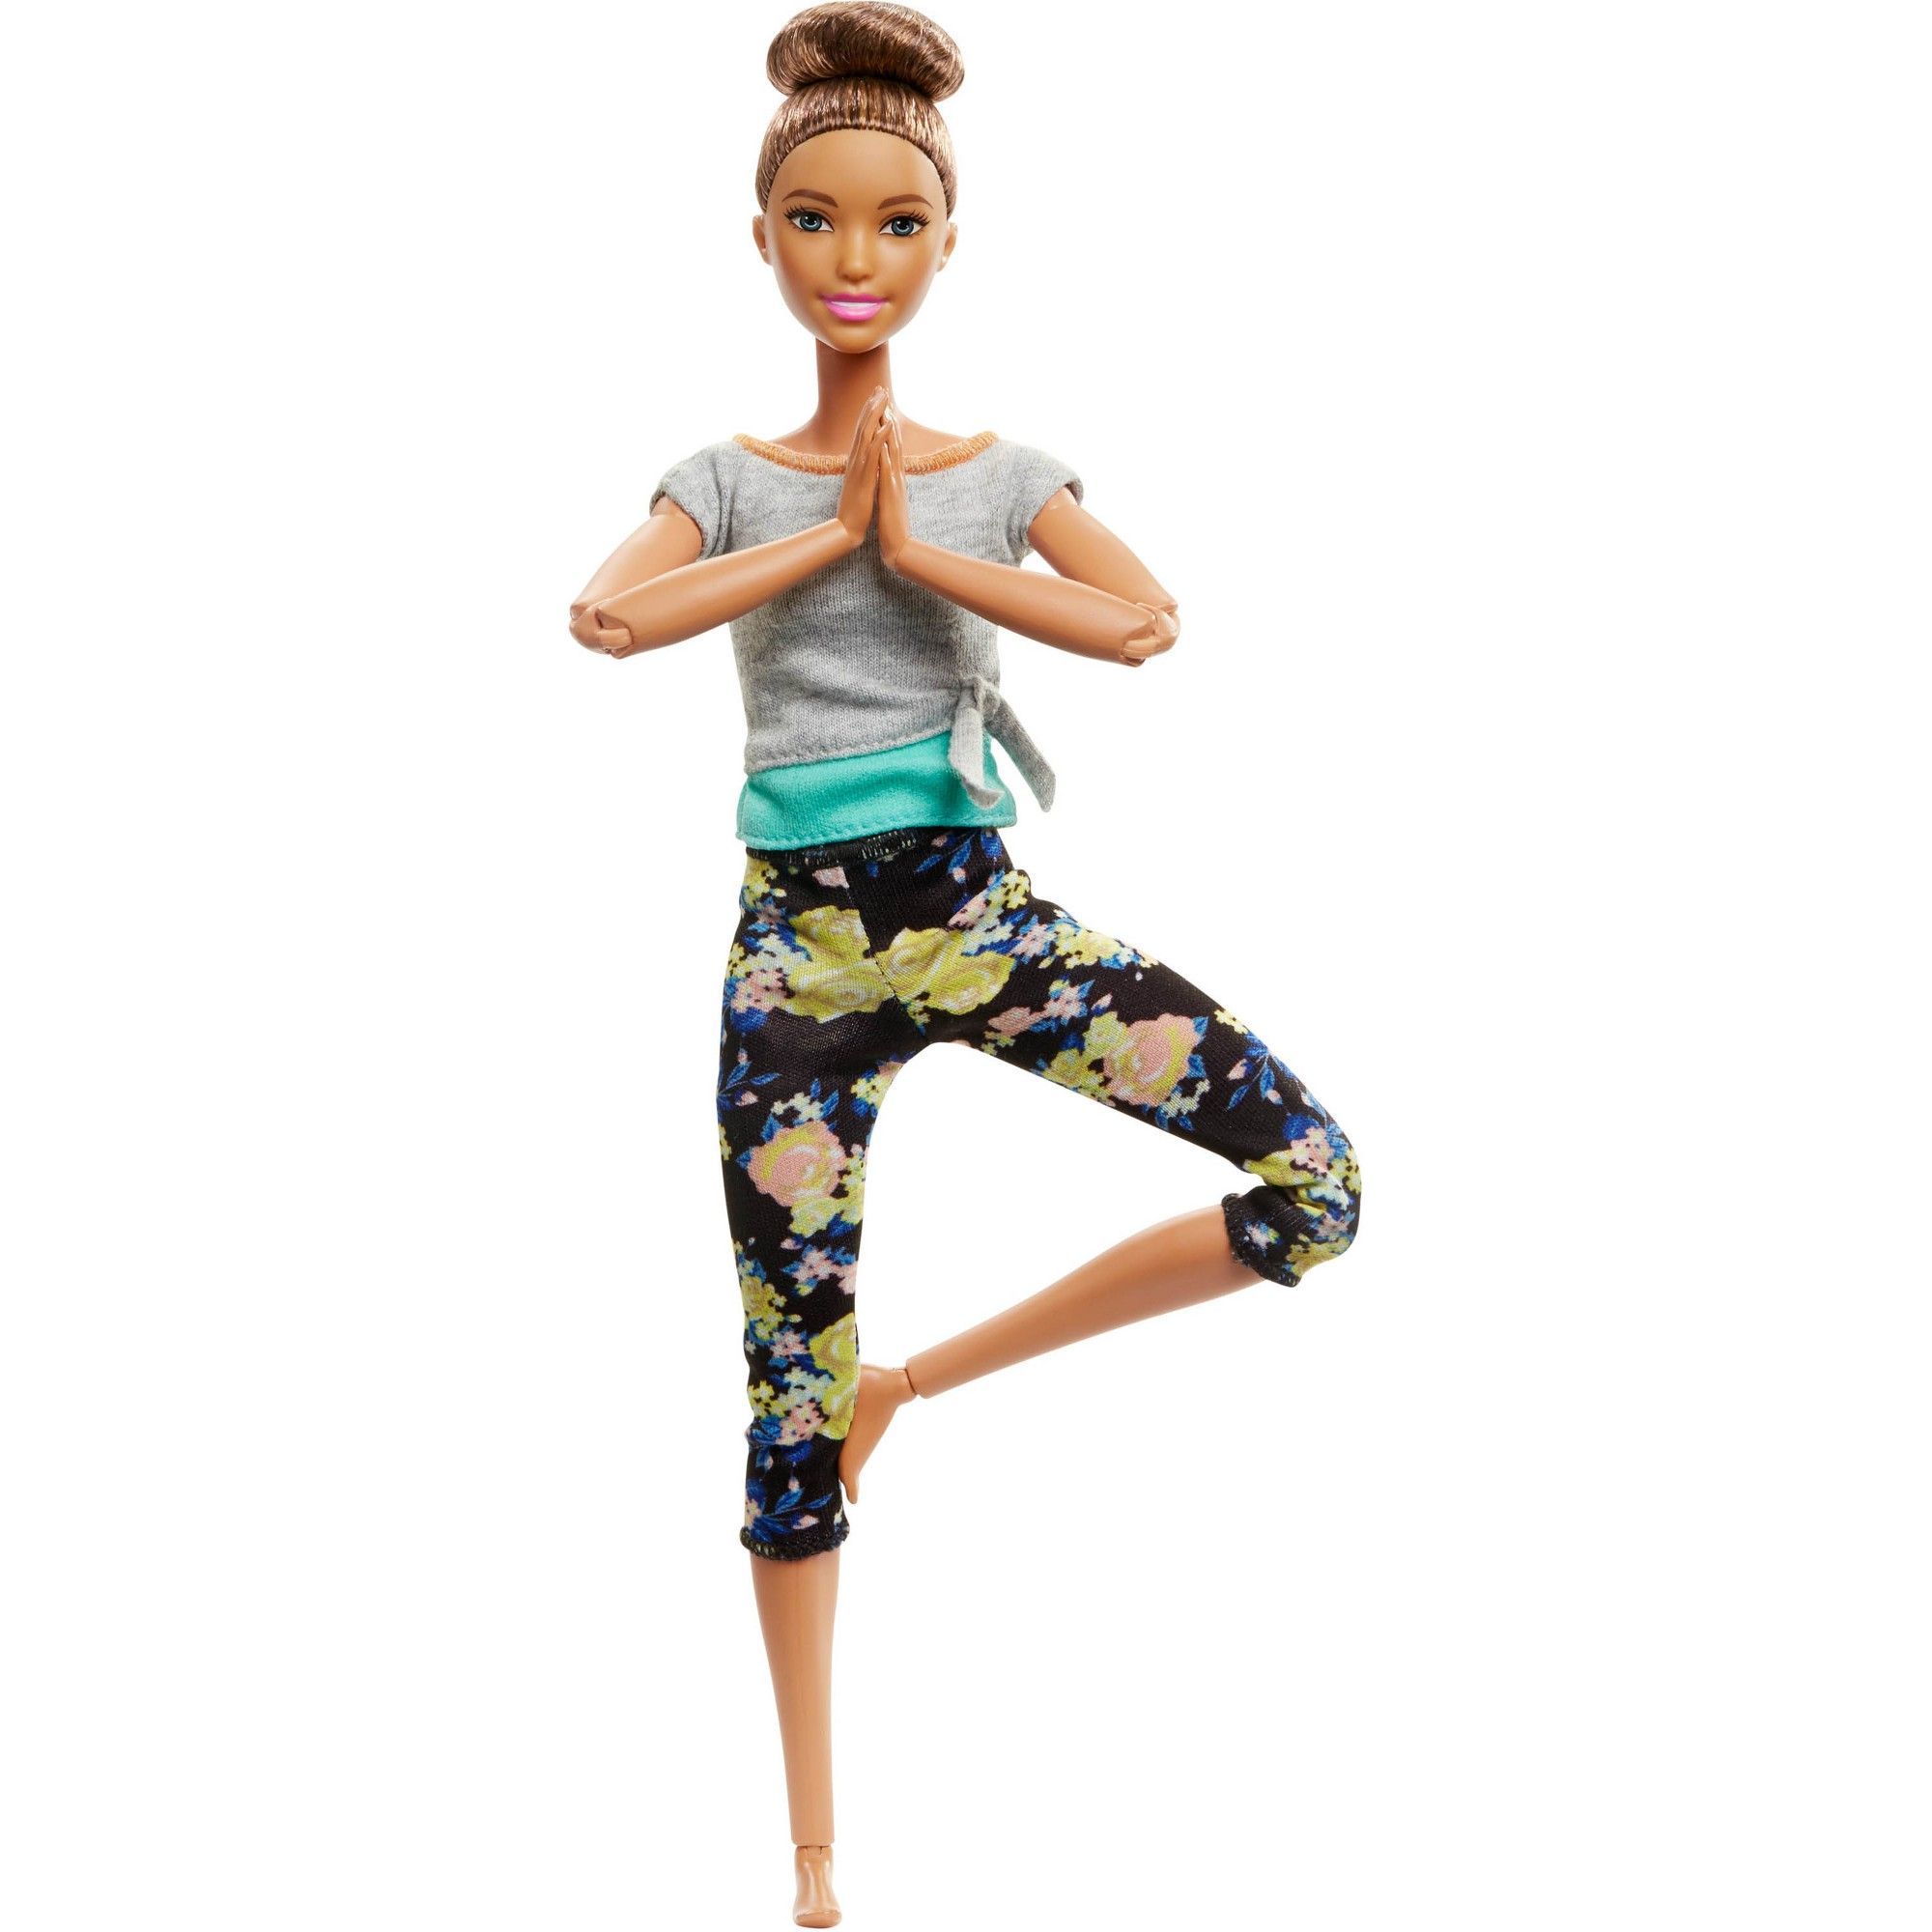 Barbie Made To Move Yoga Doll Blue. Made to move barbie, Yoga dolls, Barbie